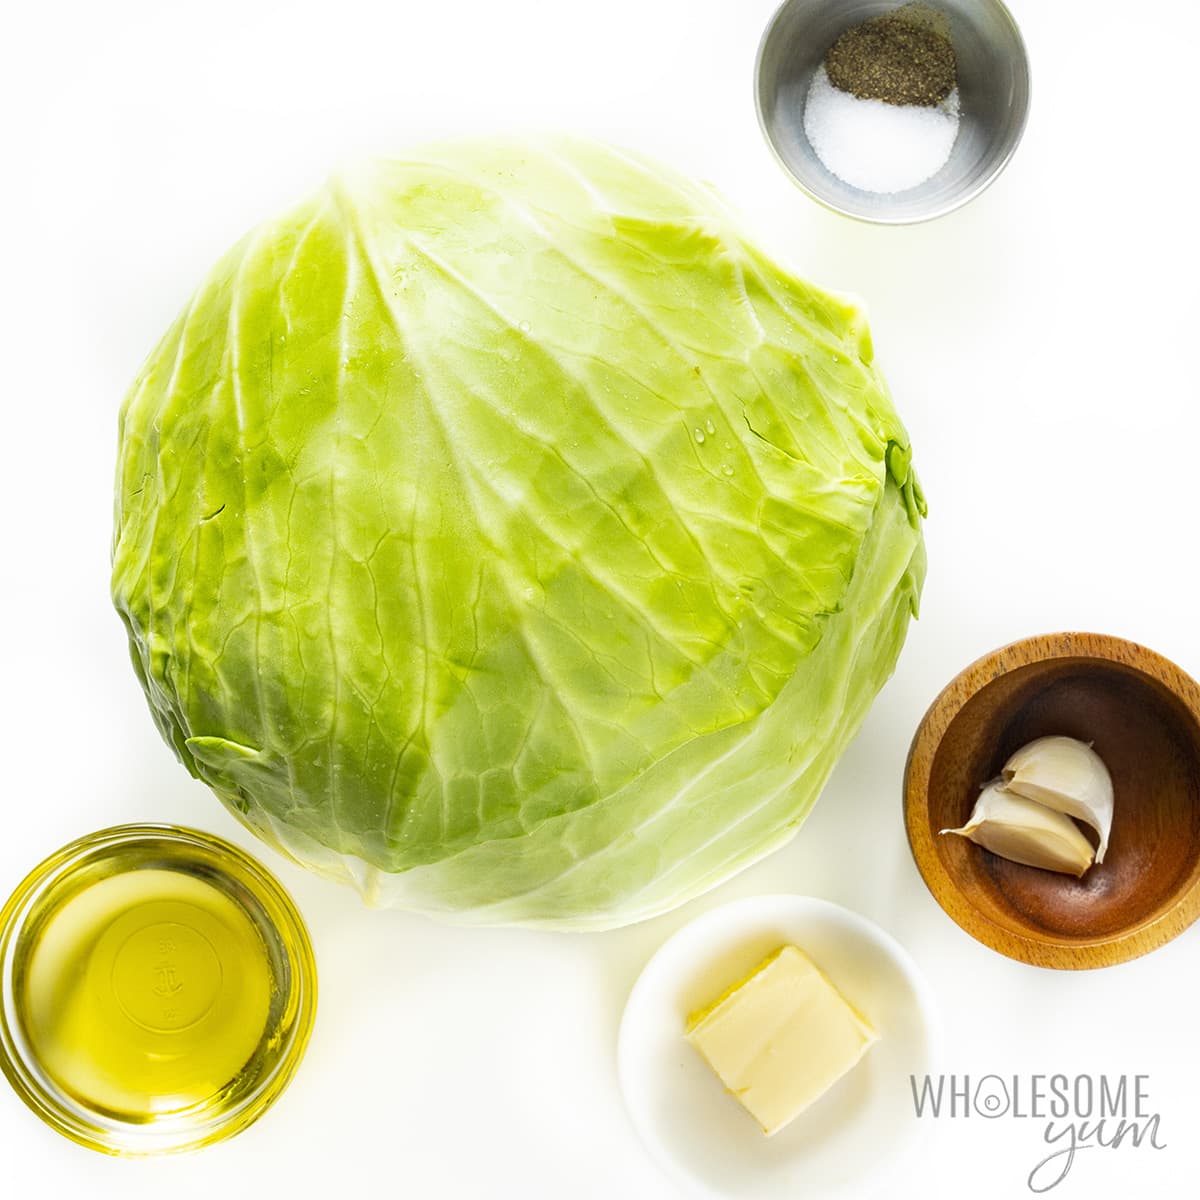 Sauteed cabbage ingredients in bowls.